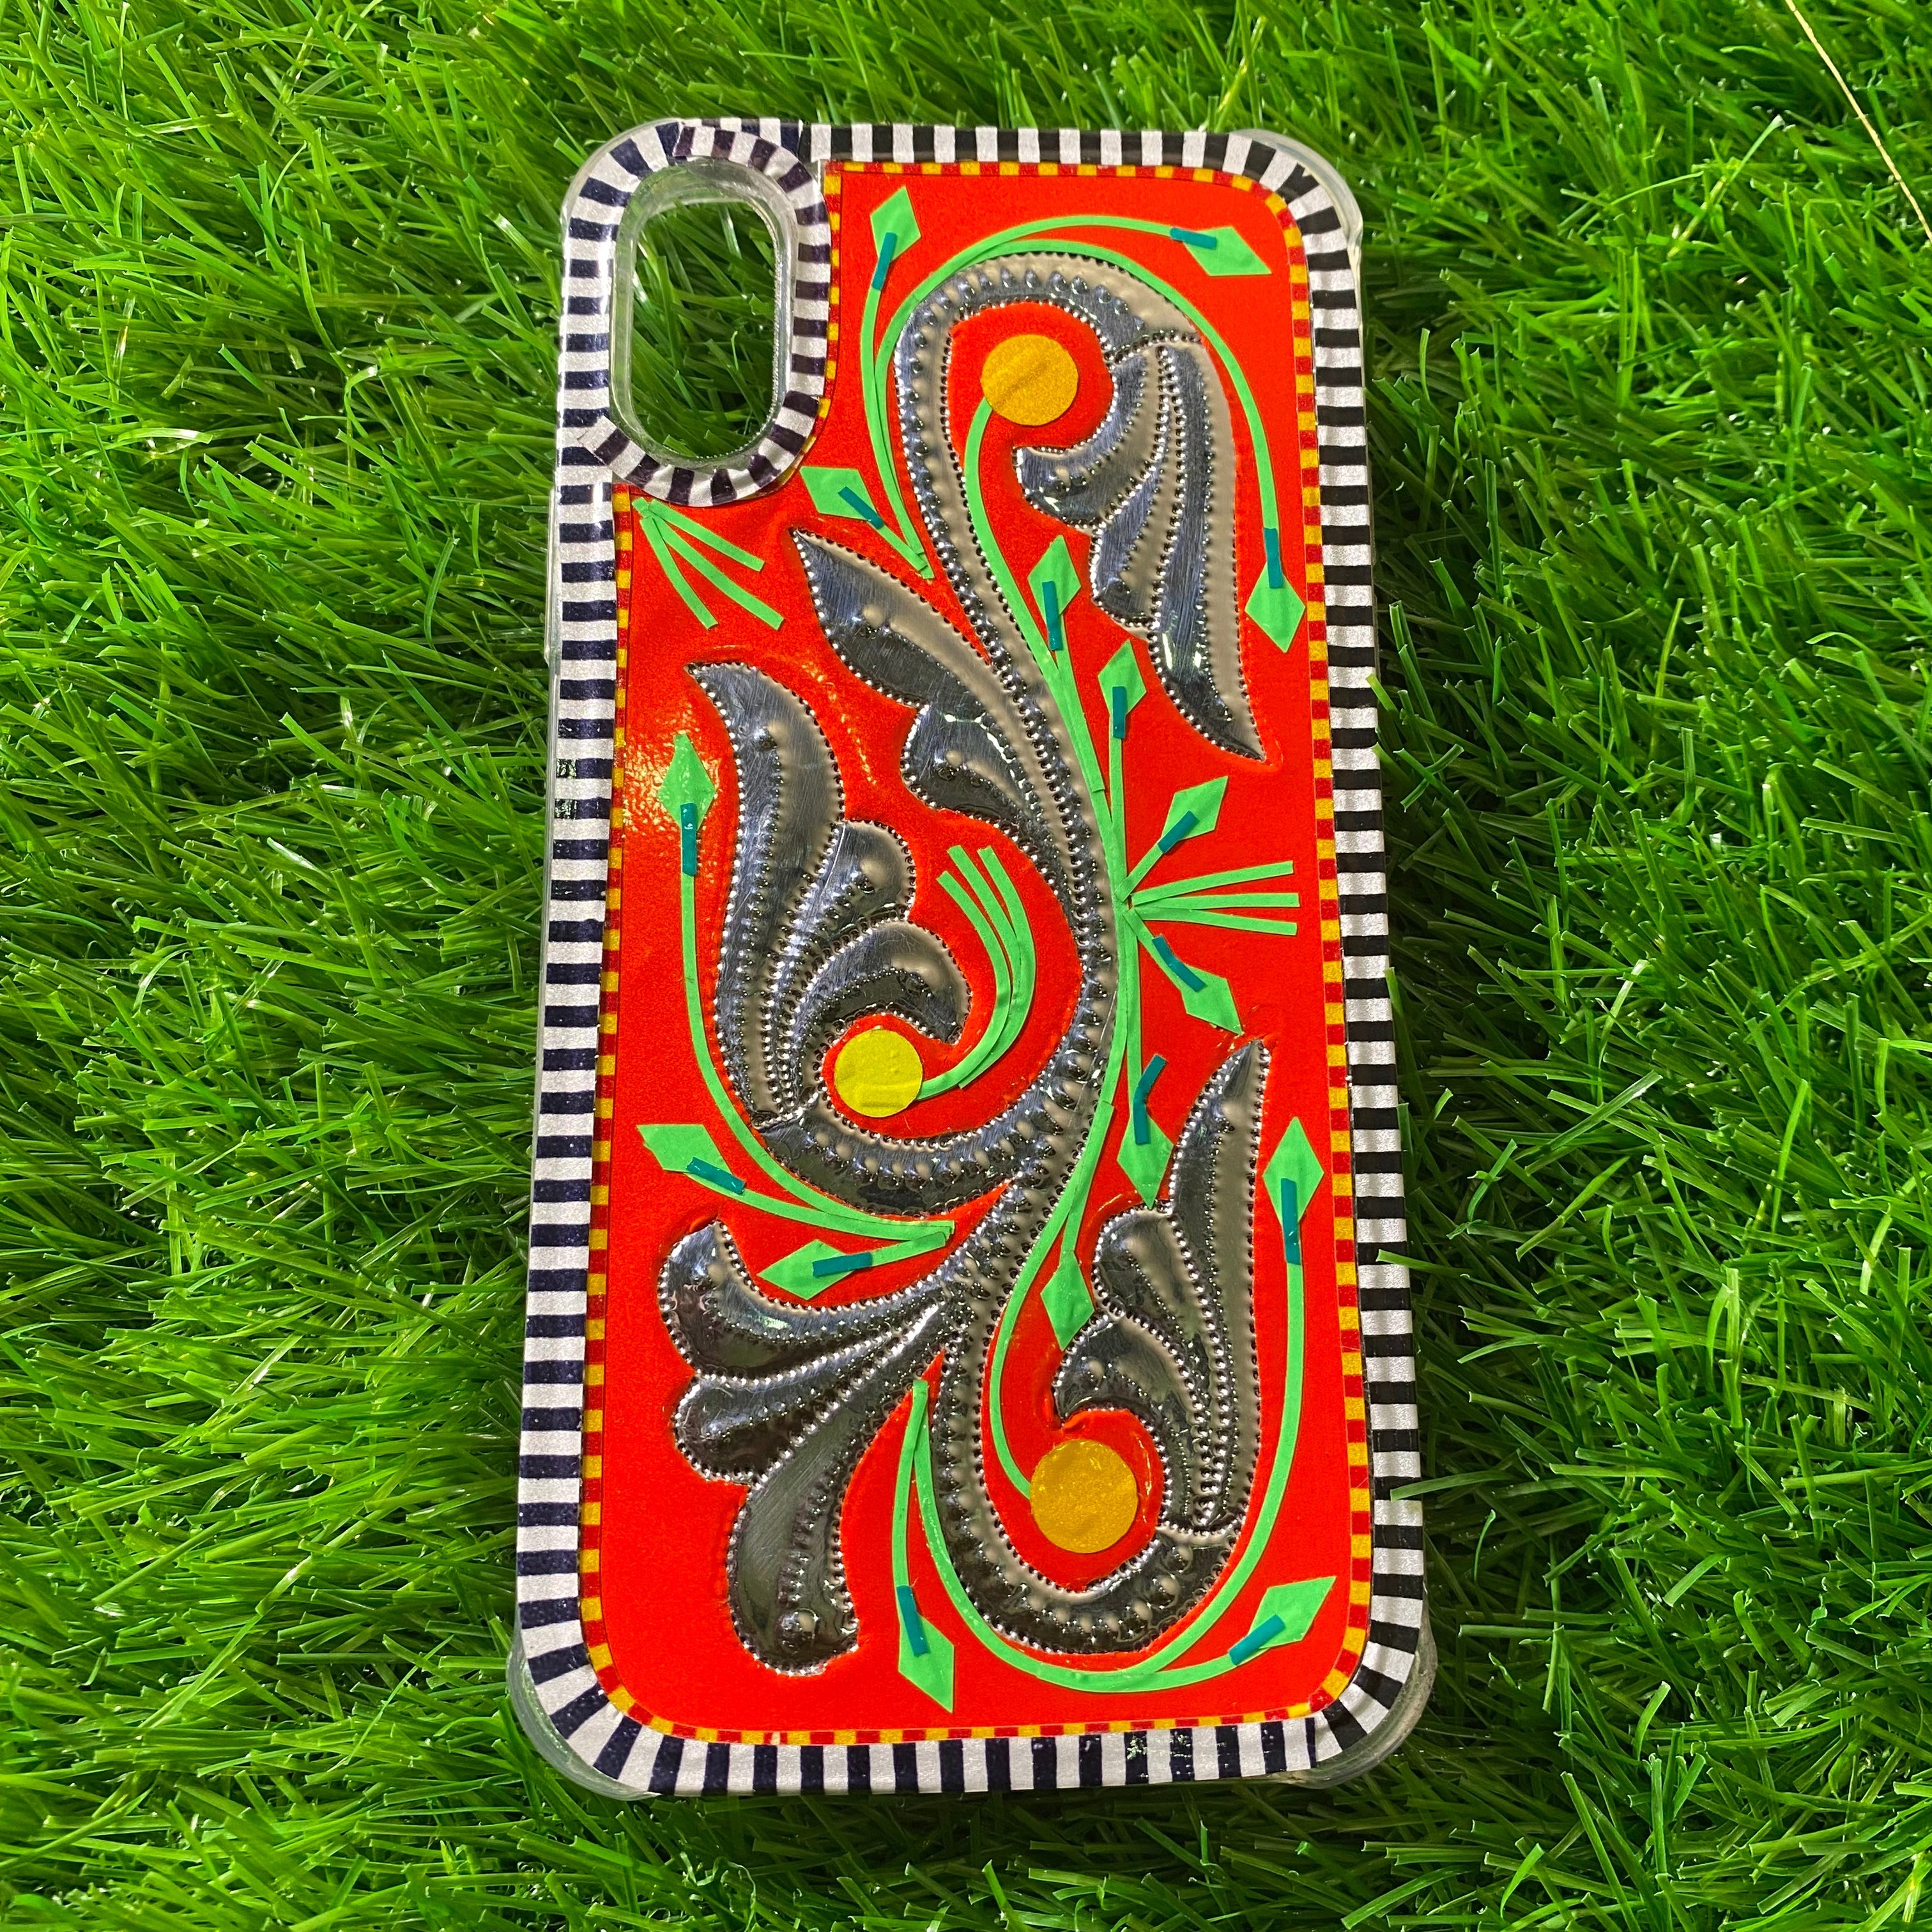 Red Truck Art Mobile Covers Handcrafted